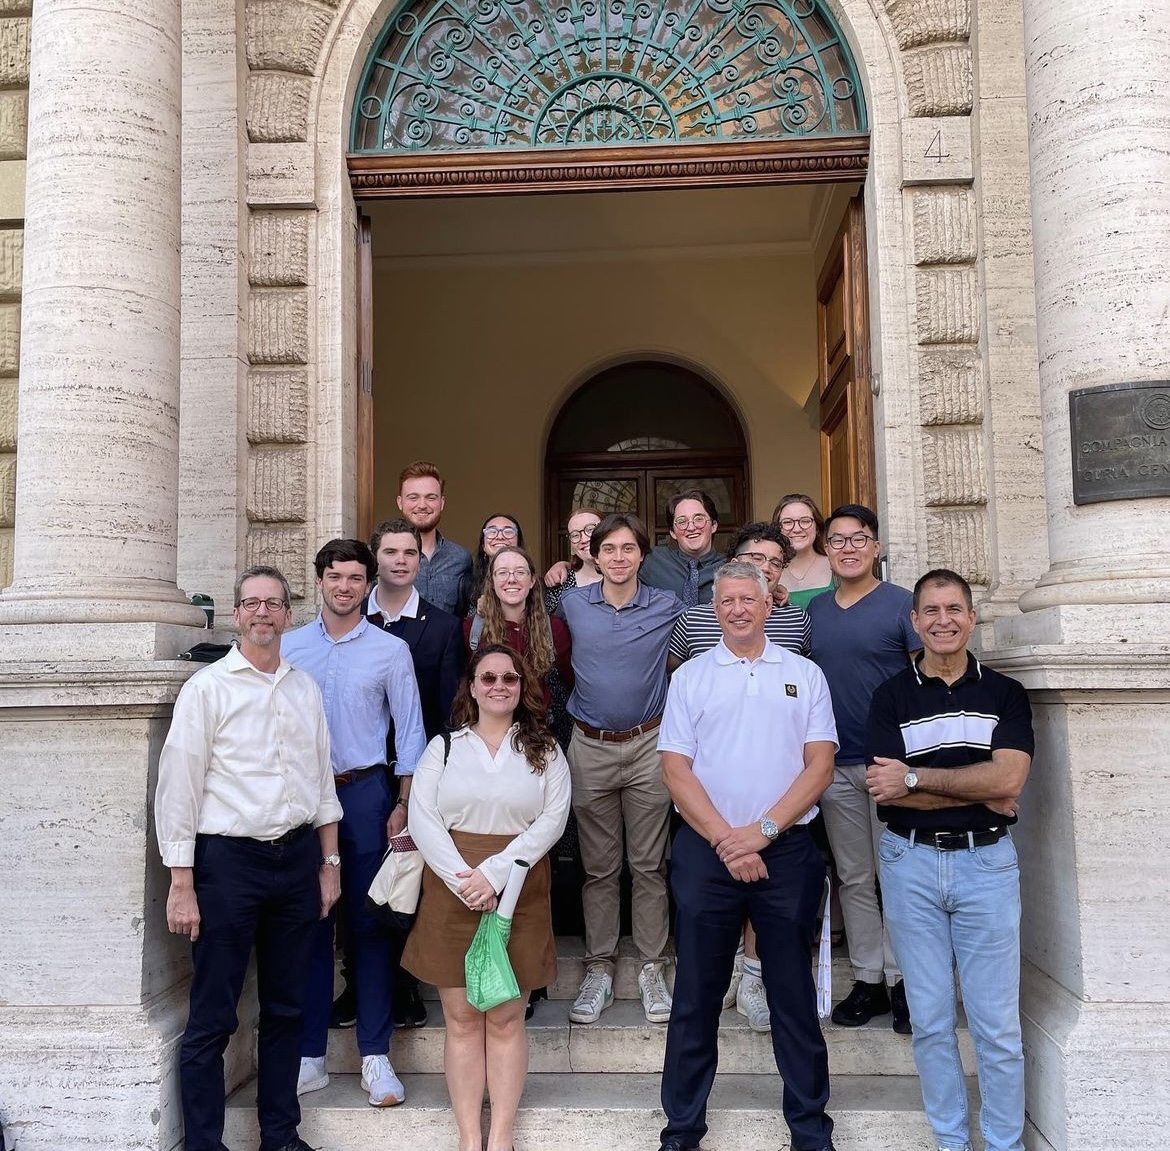 Through conversations with their peers and delegates in Rome, the group of students recognized the Church’s openness to change and their willingness to listen to all members of the Catholic Church. (Courtesy of Instagram)